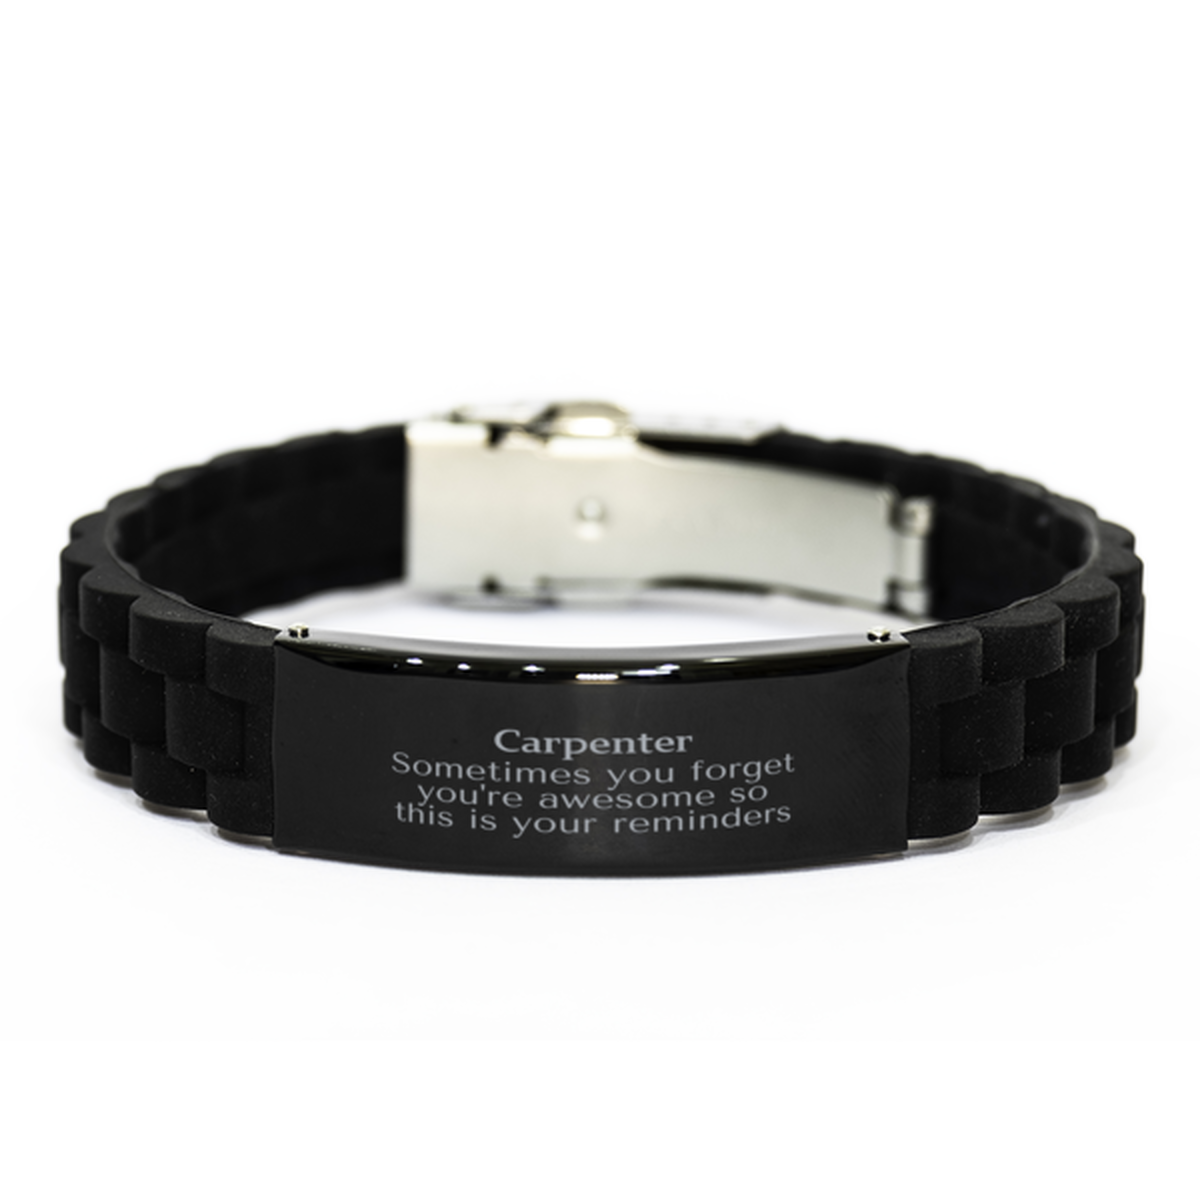 Sentimental Carpenter Black Glidelock Clasp Bracelet, Carpenter Sometimes you forget you're awesome so this is your reminders, Graduation Christmas Birthday Gifts for Carpenter, Men, Women, Coworkers